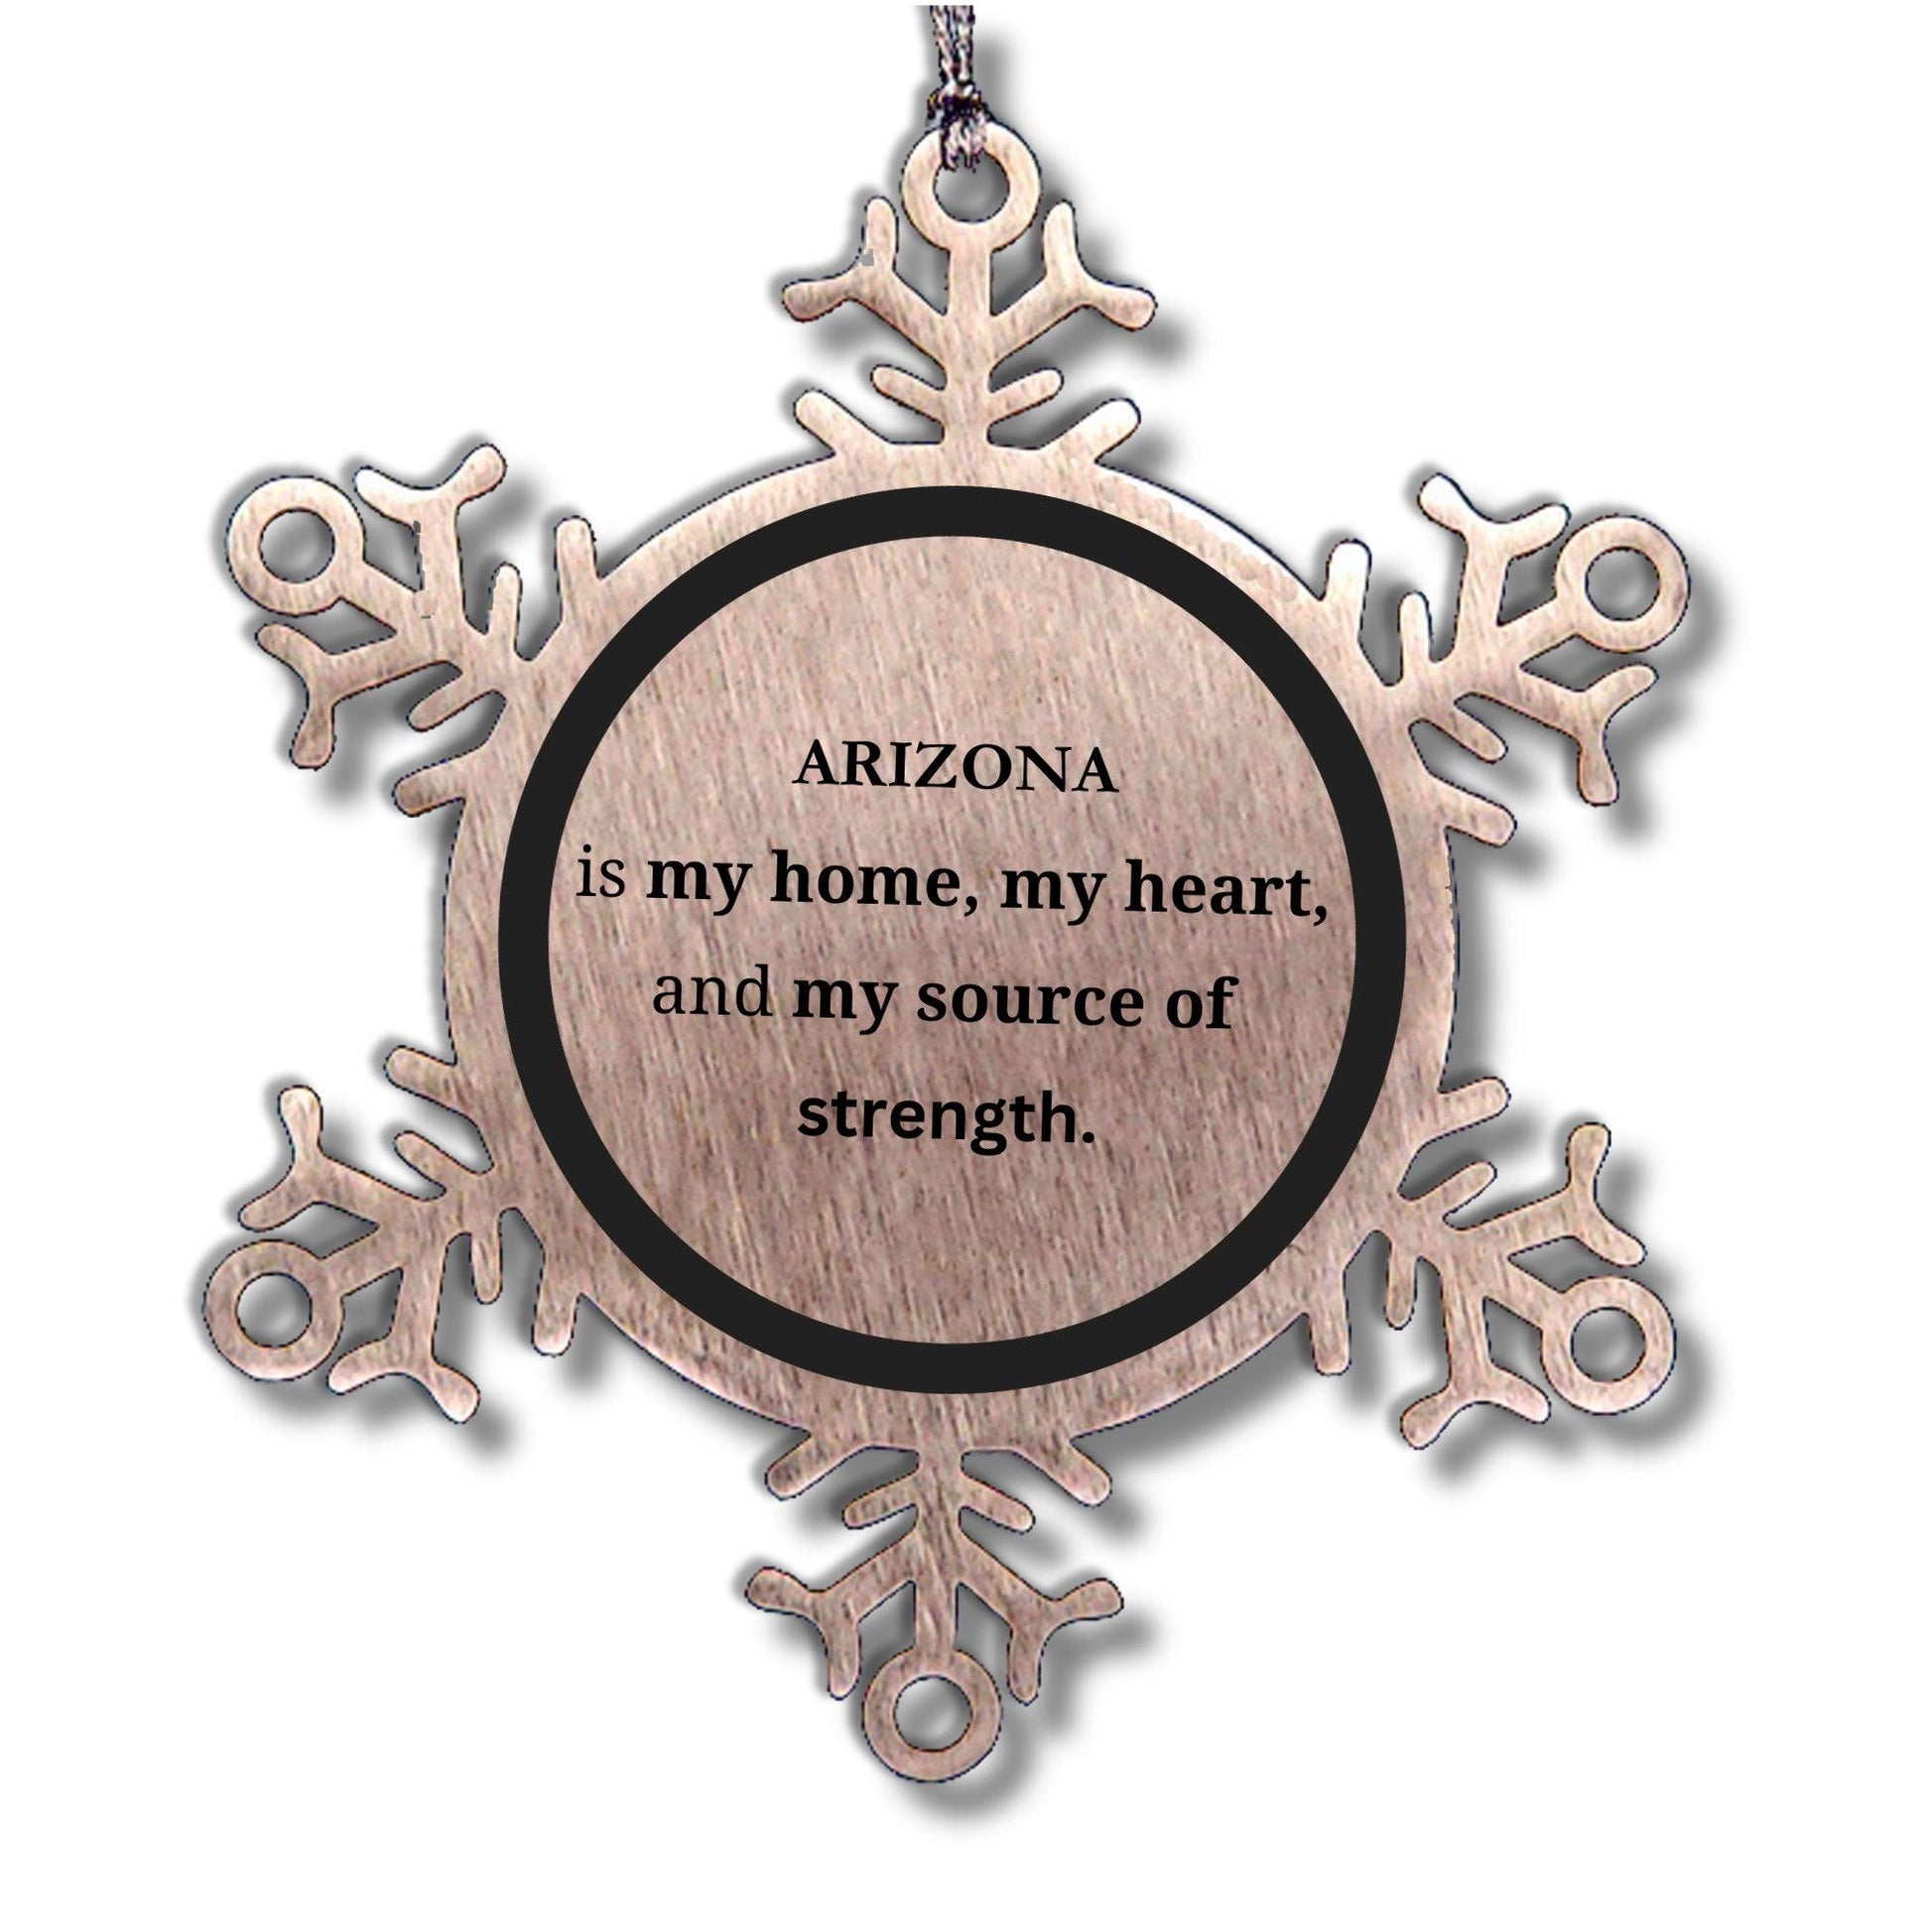 Alabama is my home Gifts, Lovely Alabama Birthday Christmas Snowflake Ornament For People from Alabama, Men, Women, Friends - Mallard Moon Gift Shop